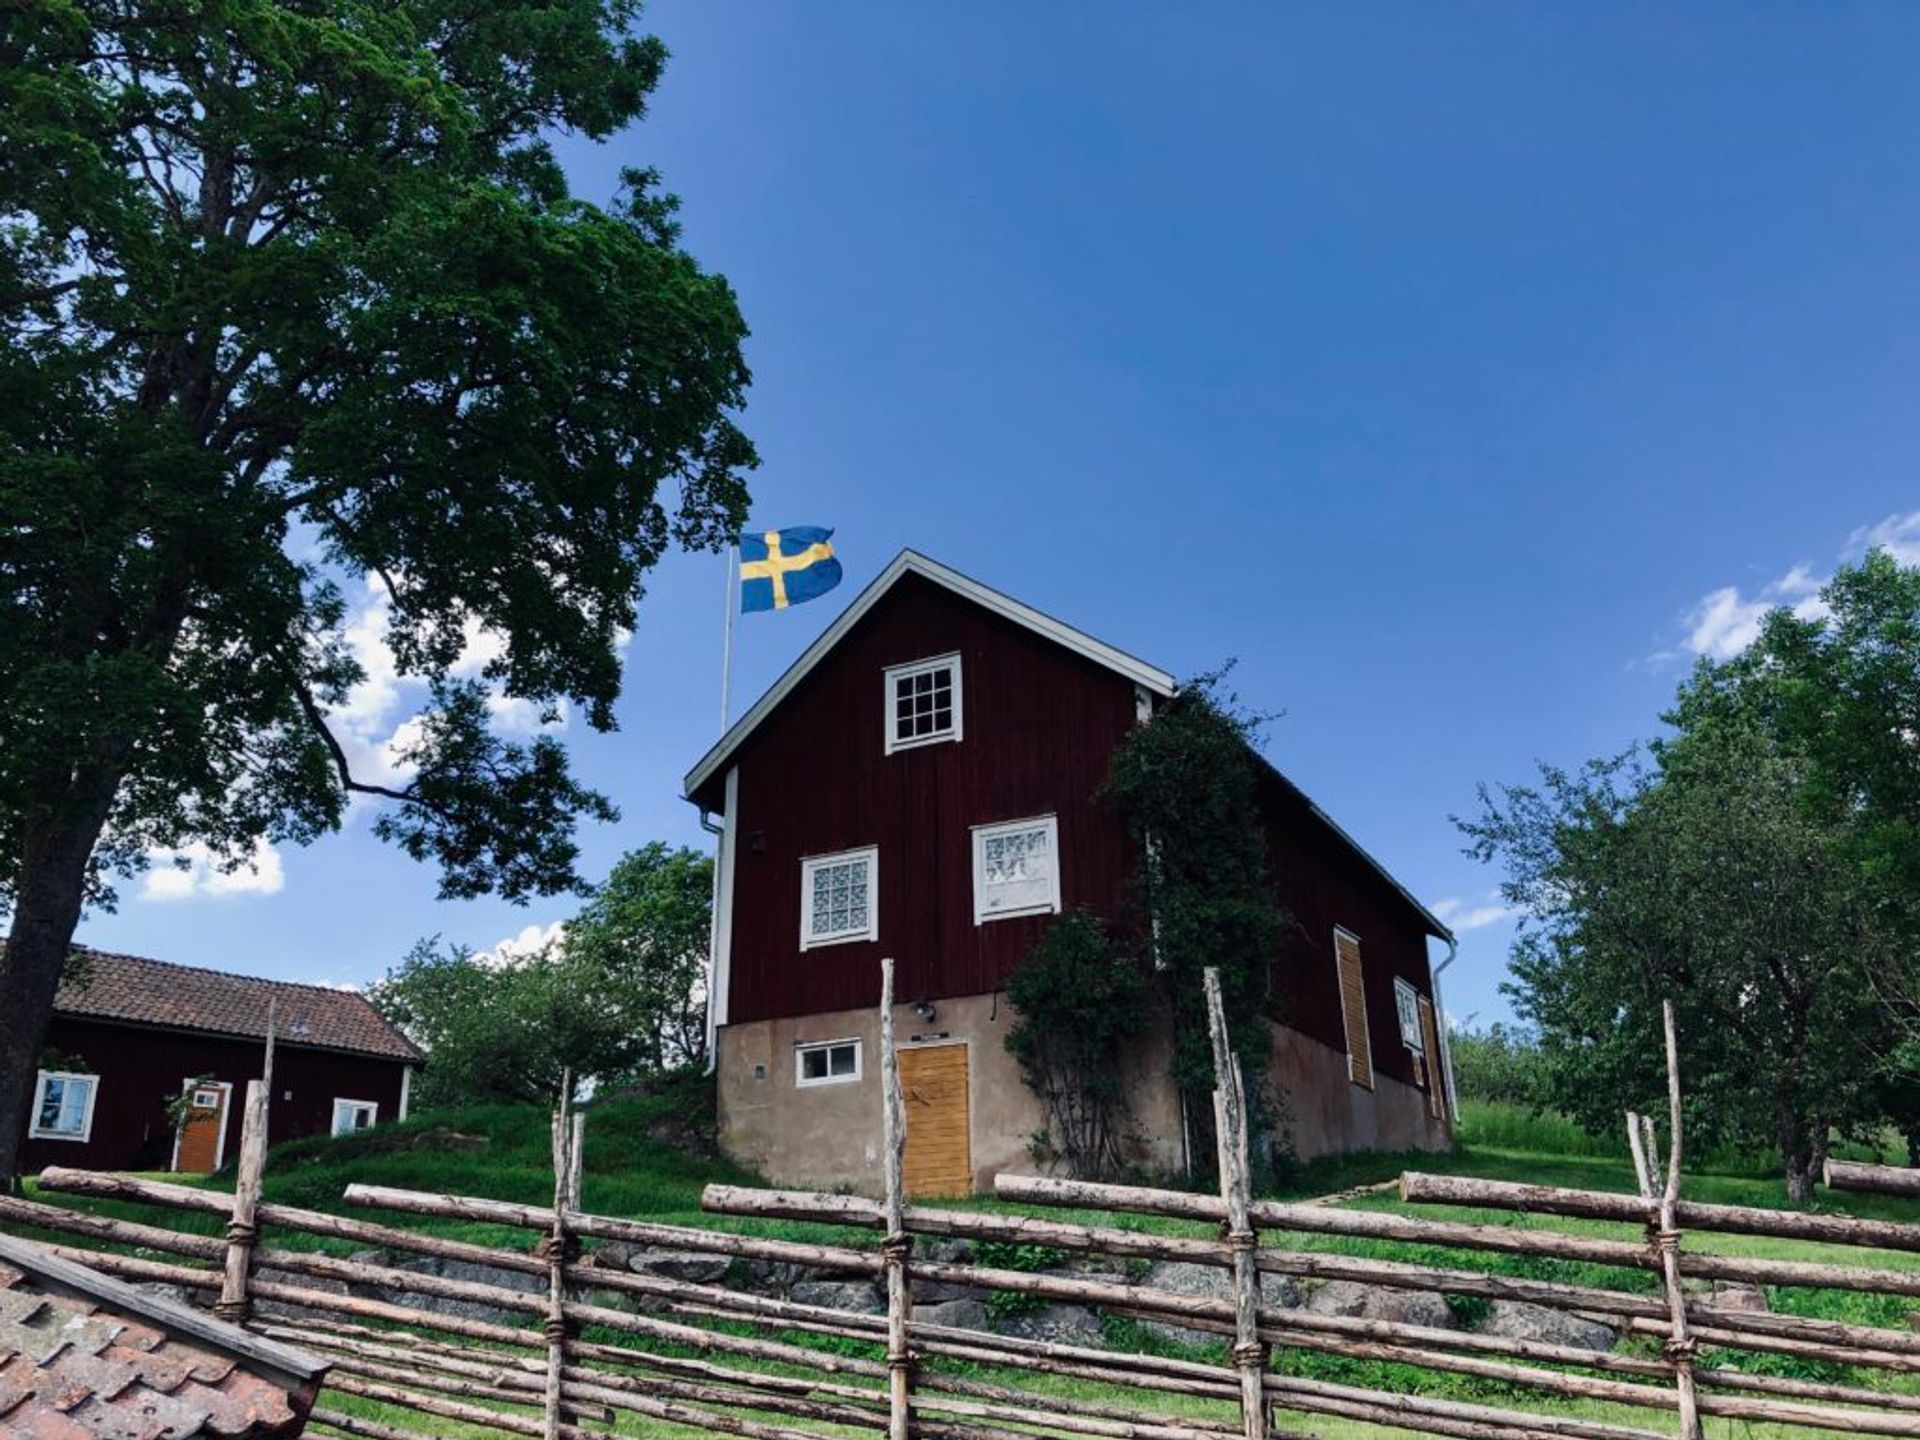 A Swedish flag flying beside a red, wooden building.